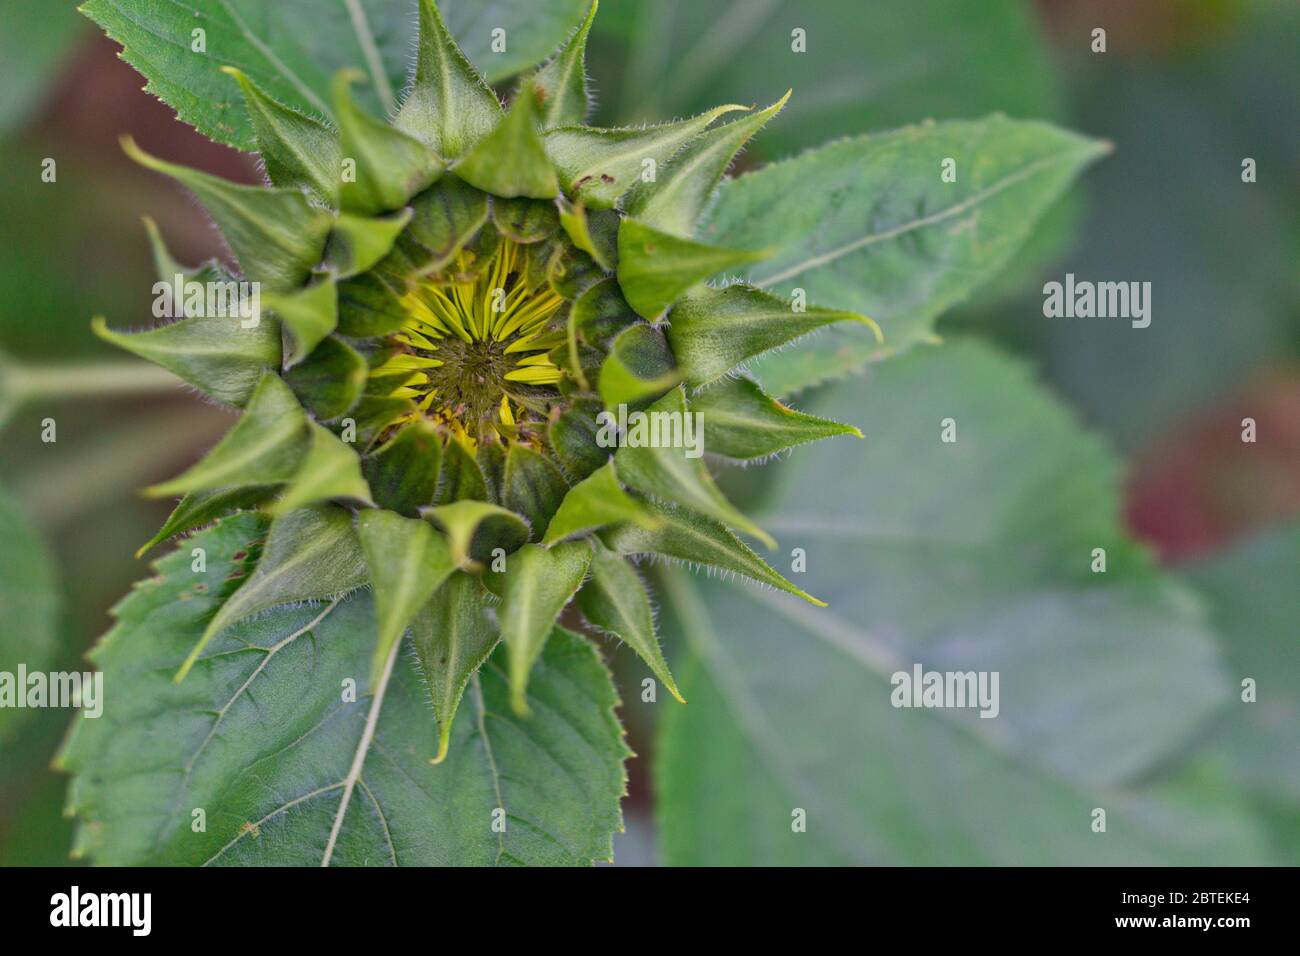 Sunflower bud, close-up as it opens.  Sharp looking edges with fuzzy hair, almost alien like. Stock Photo